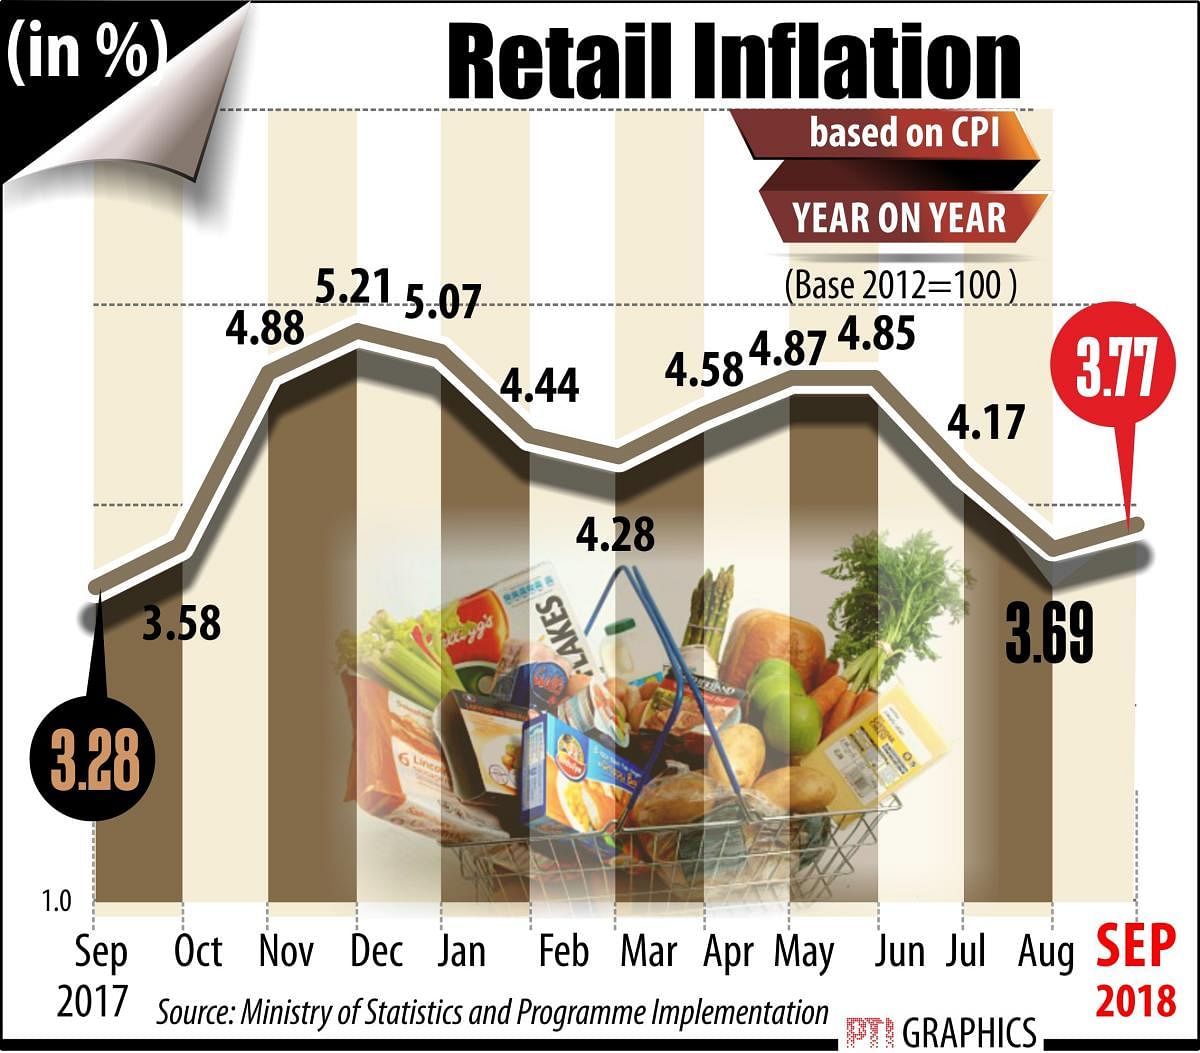 India's consumer price inflation inched up marginally to 3.77% in September backed by higher food and fuel prices while poor mining output dragged the industrial production growth to a three-month low of 4.3% in August.